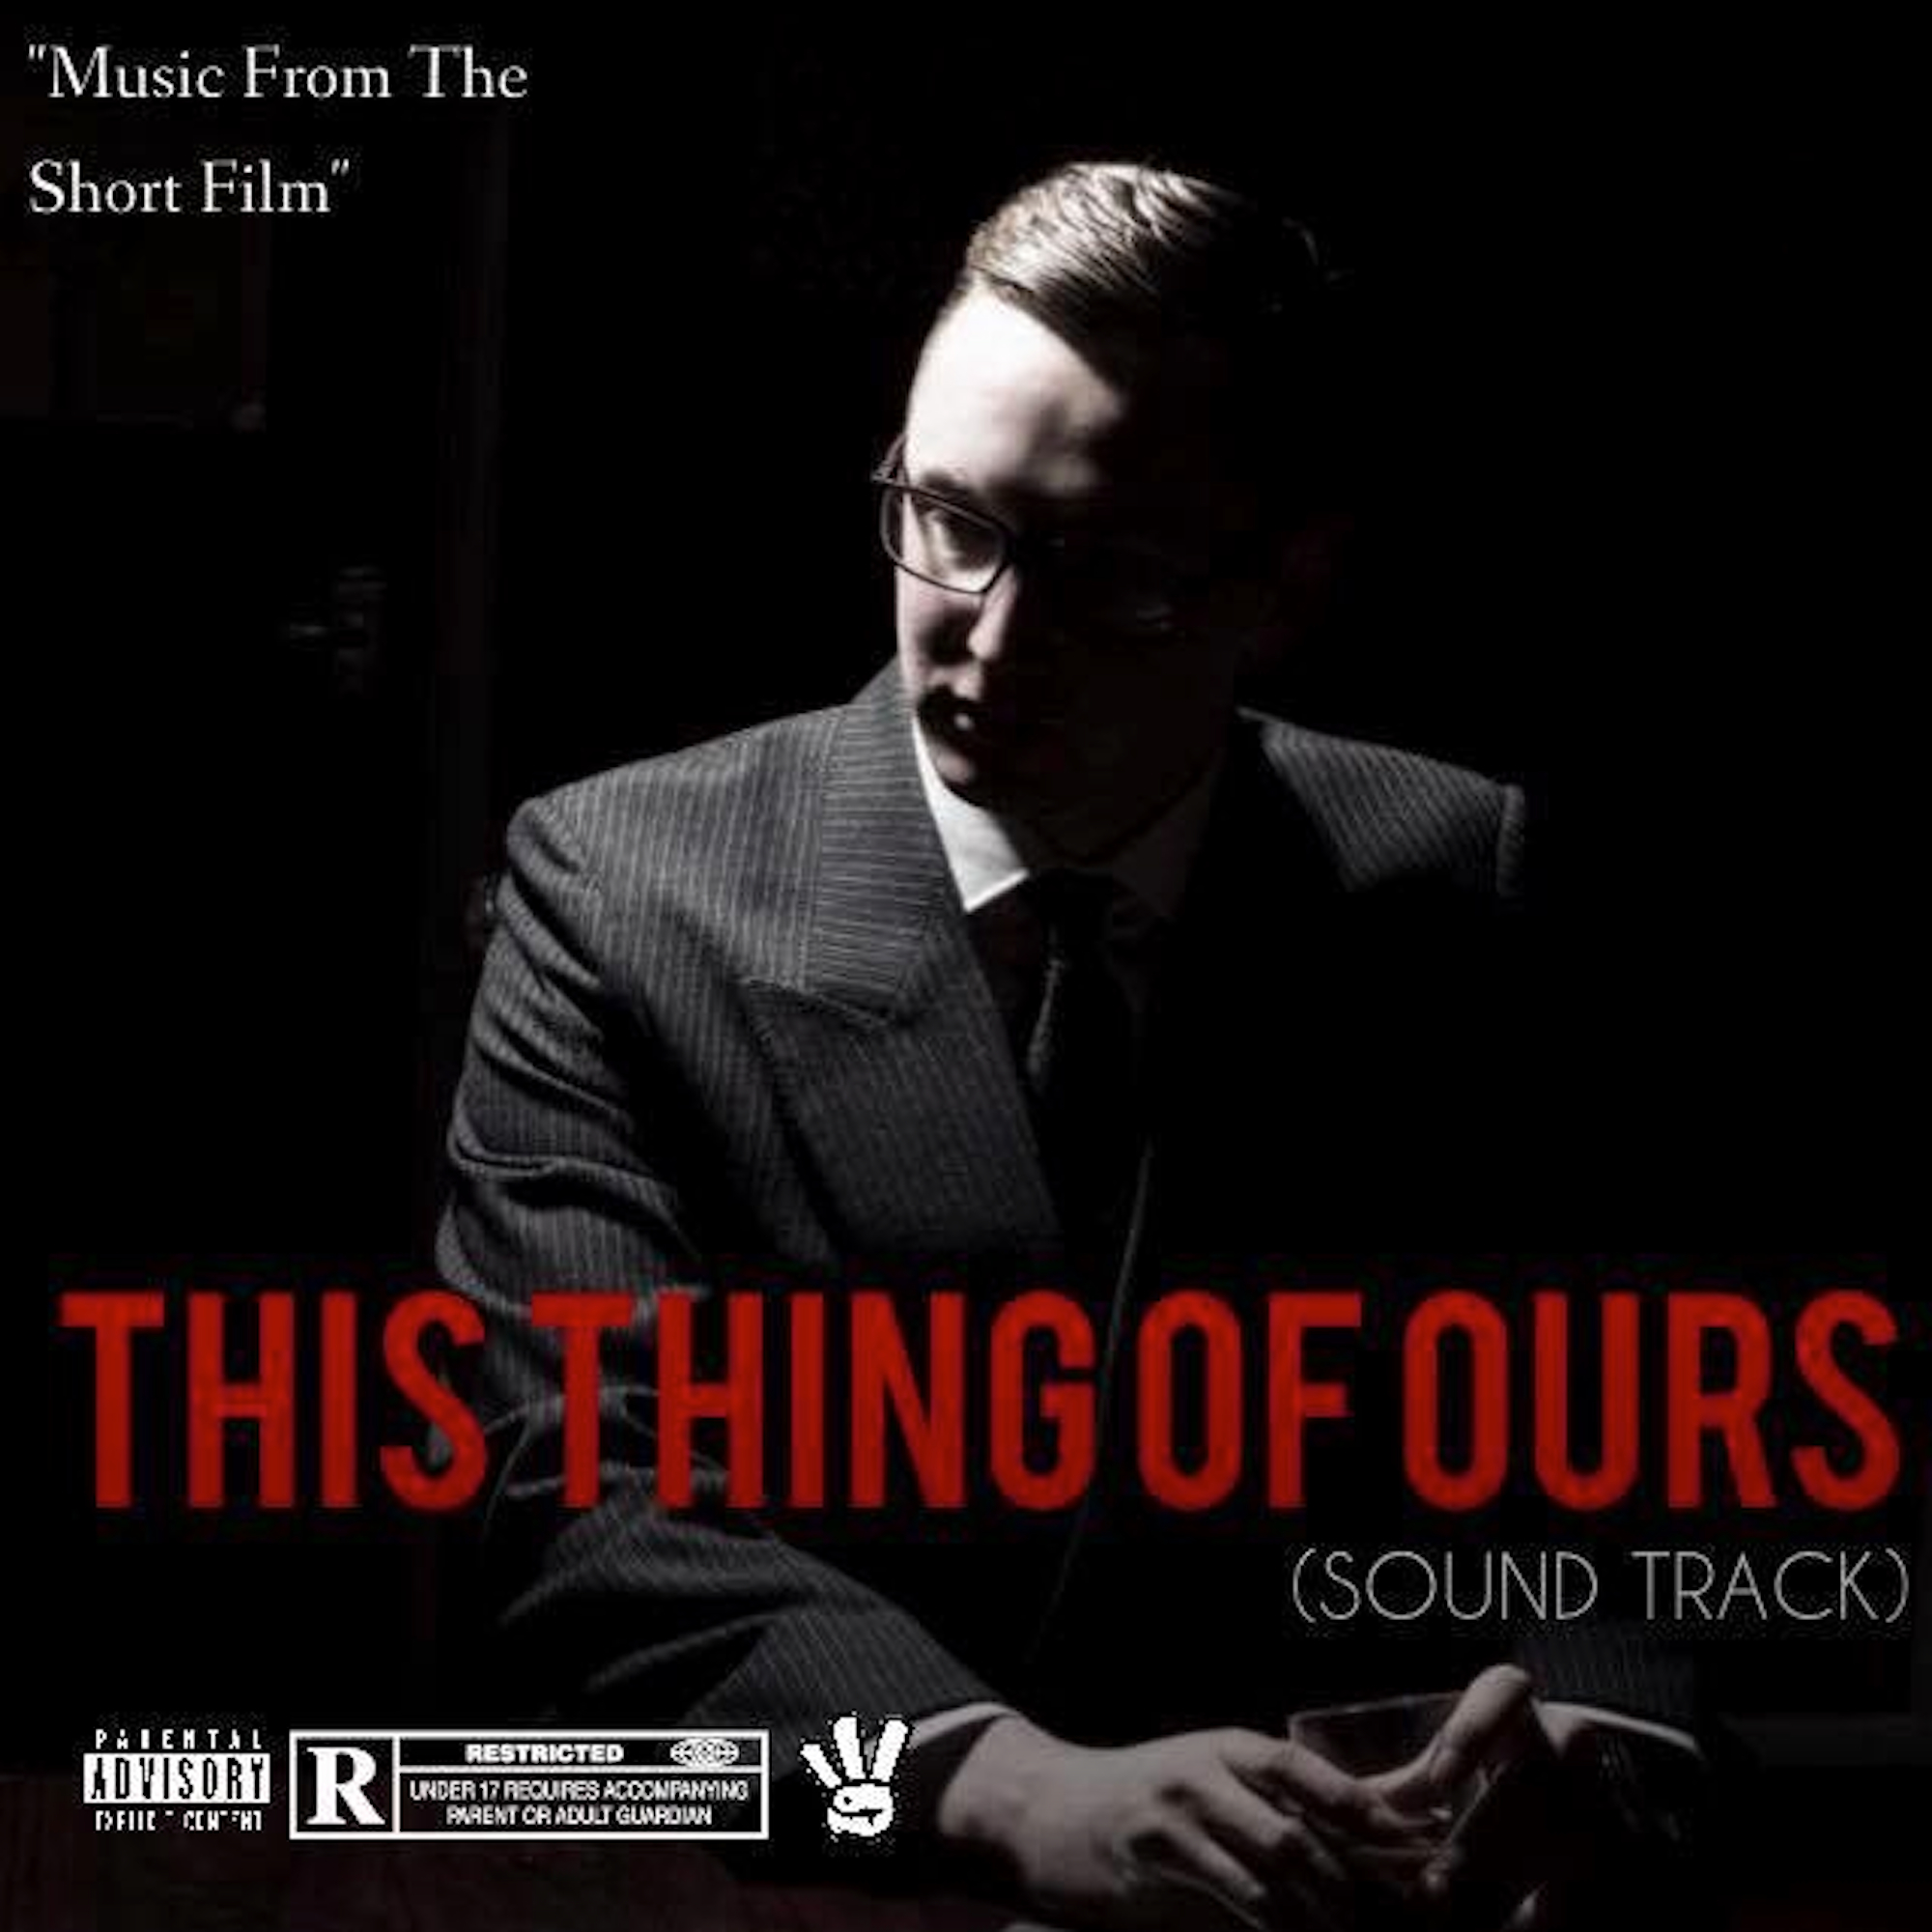 End credits Music from Short Film " This Things of Ours